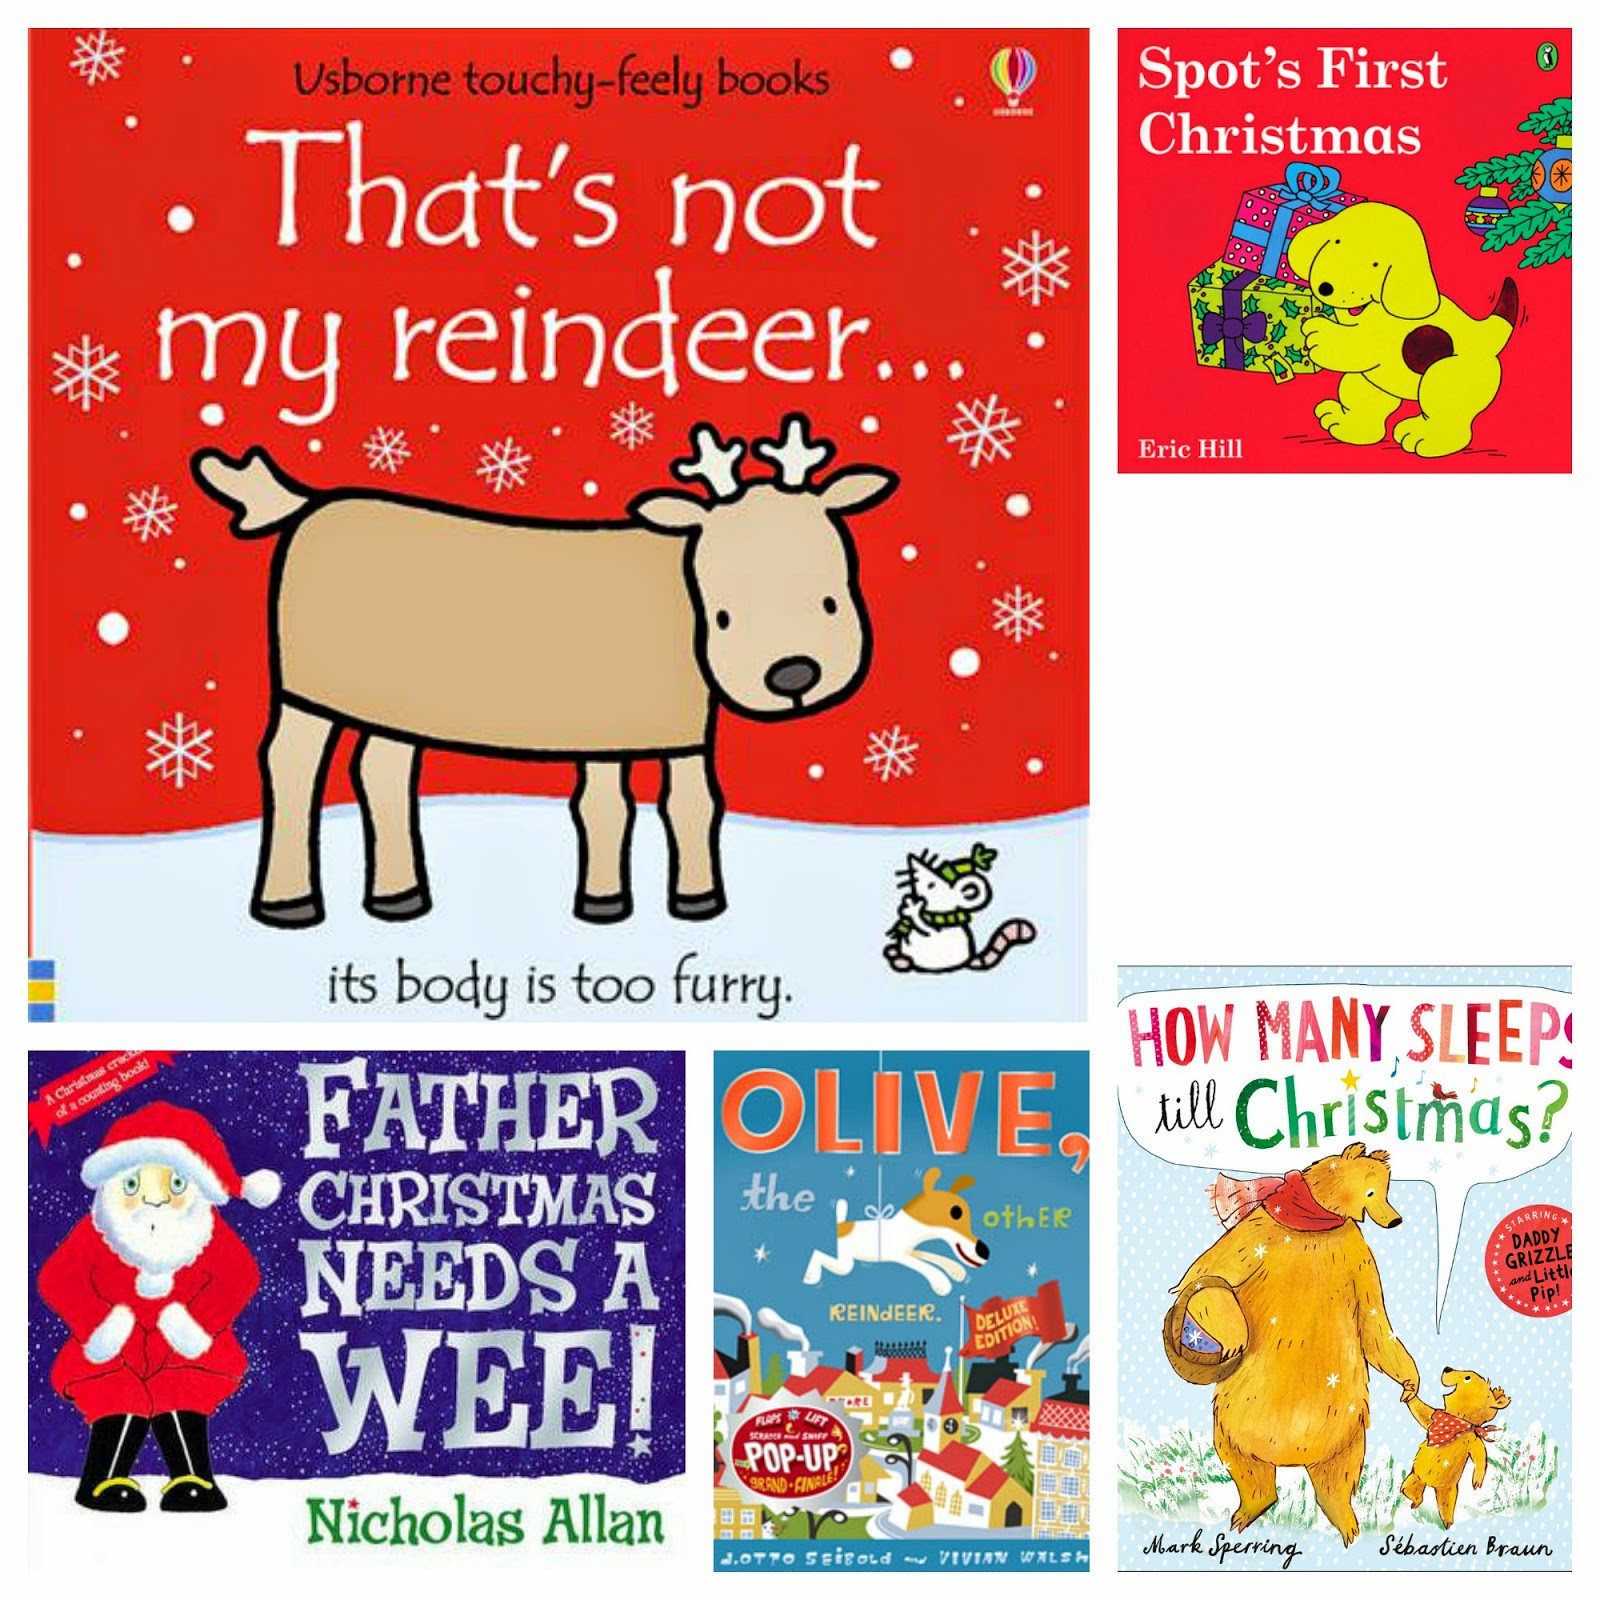 Book Club Christmas Party Ideas
 25 of the Best Christmas Books Bookclub Special Part 3